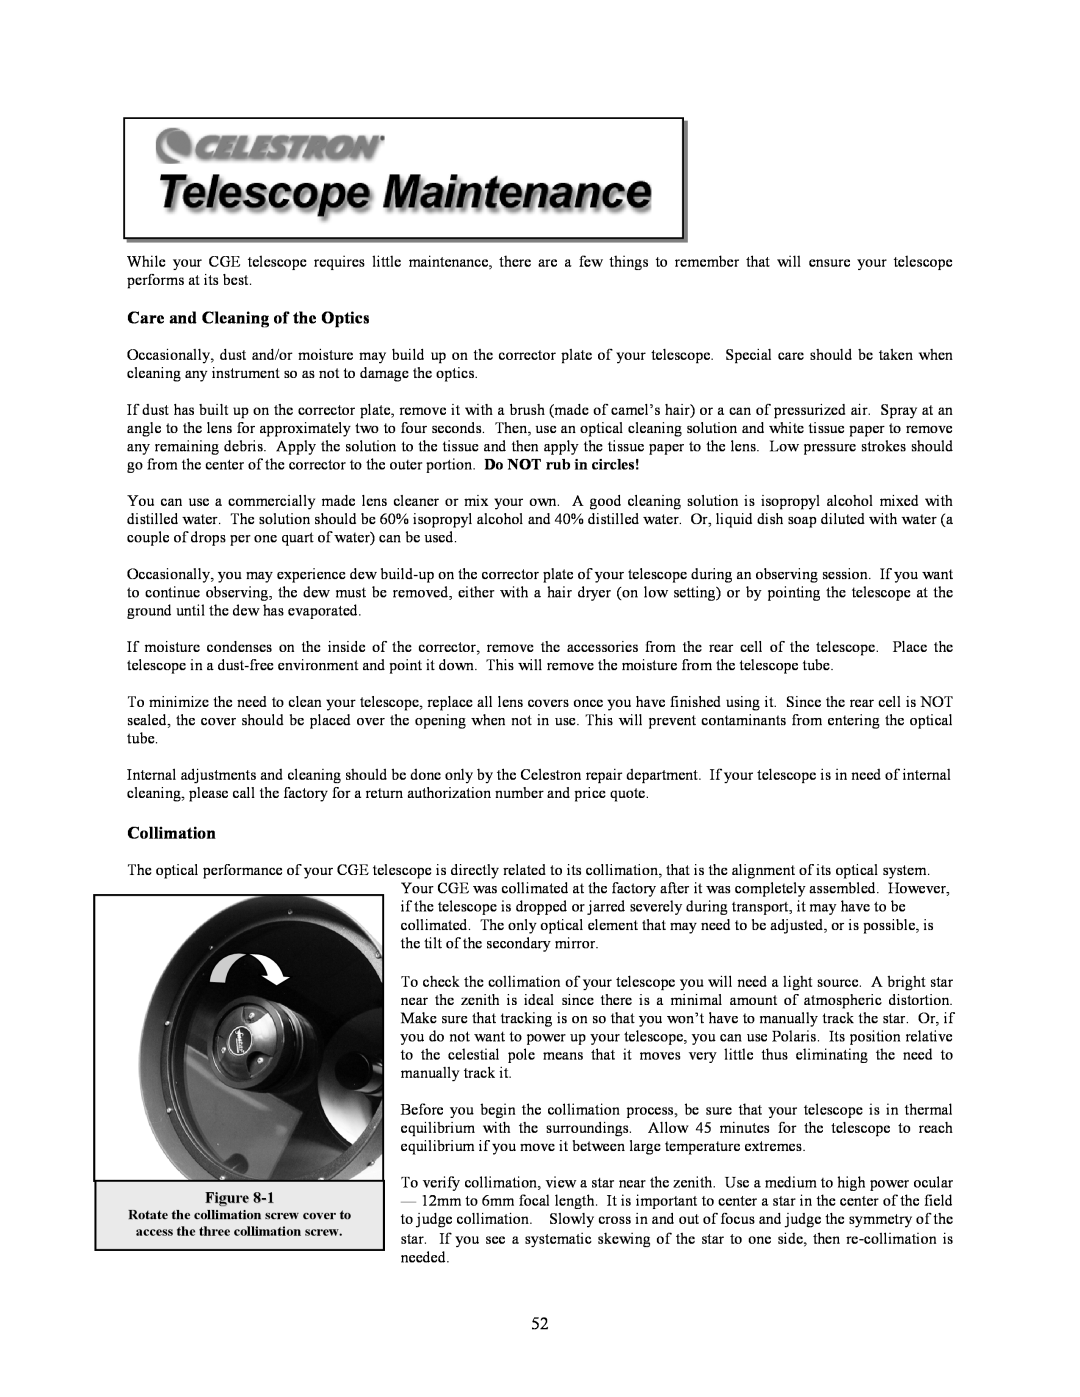 Celestron CGE925, CGE1100, CGE800, CGE1400 manual Care and Cleaning of the Optics, Collimation 